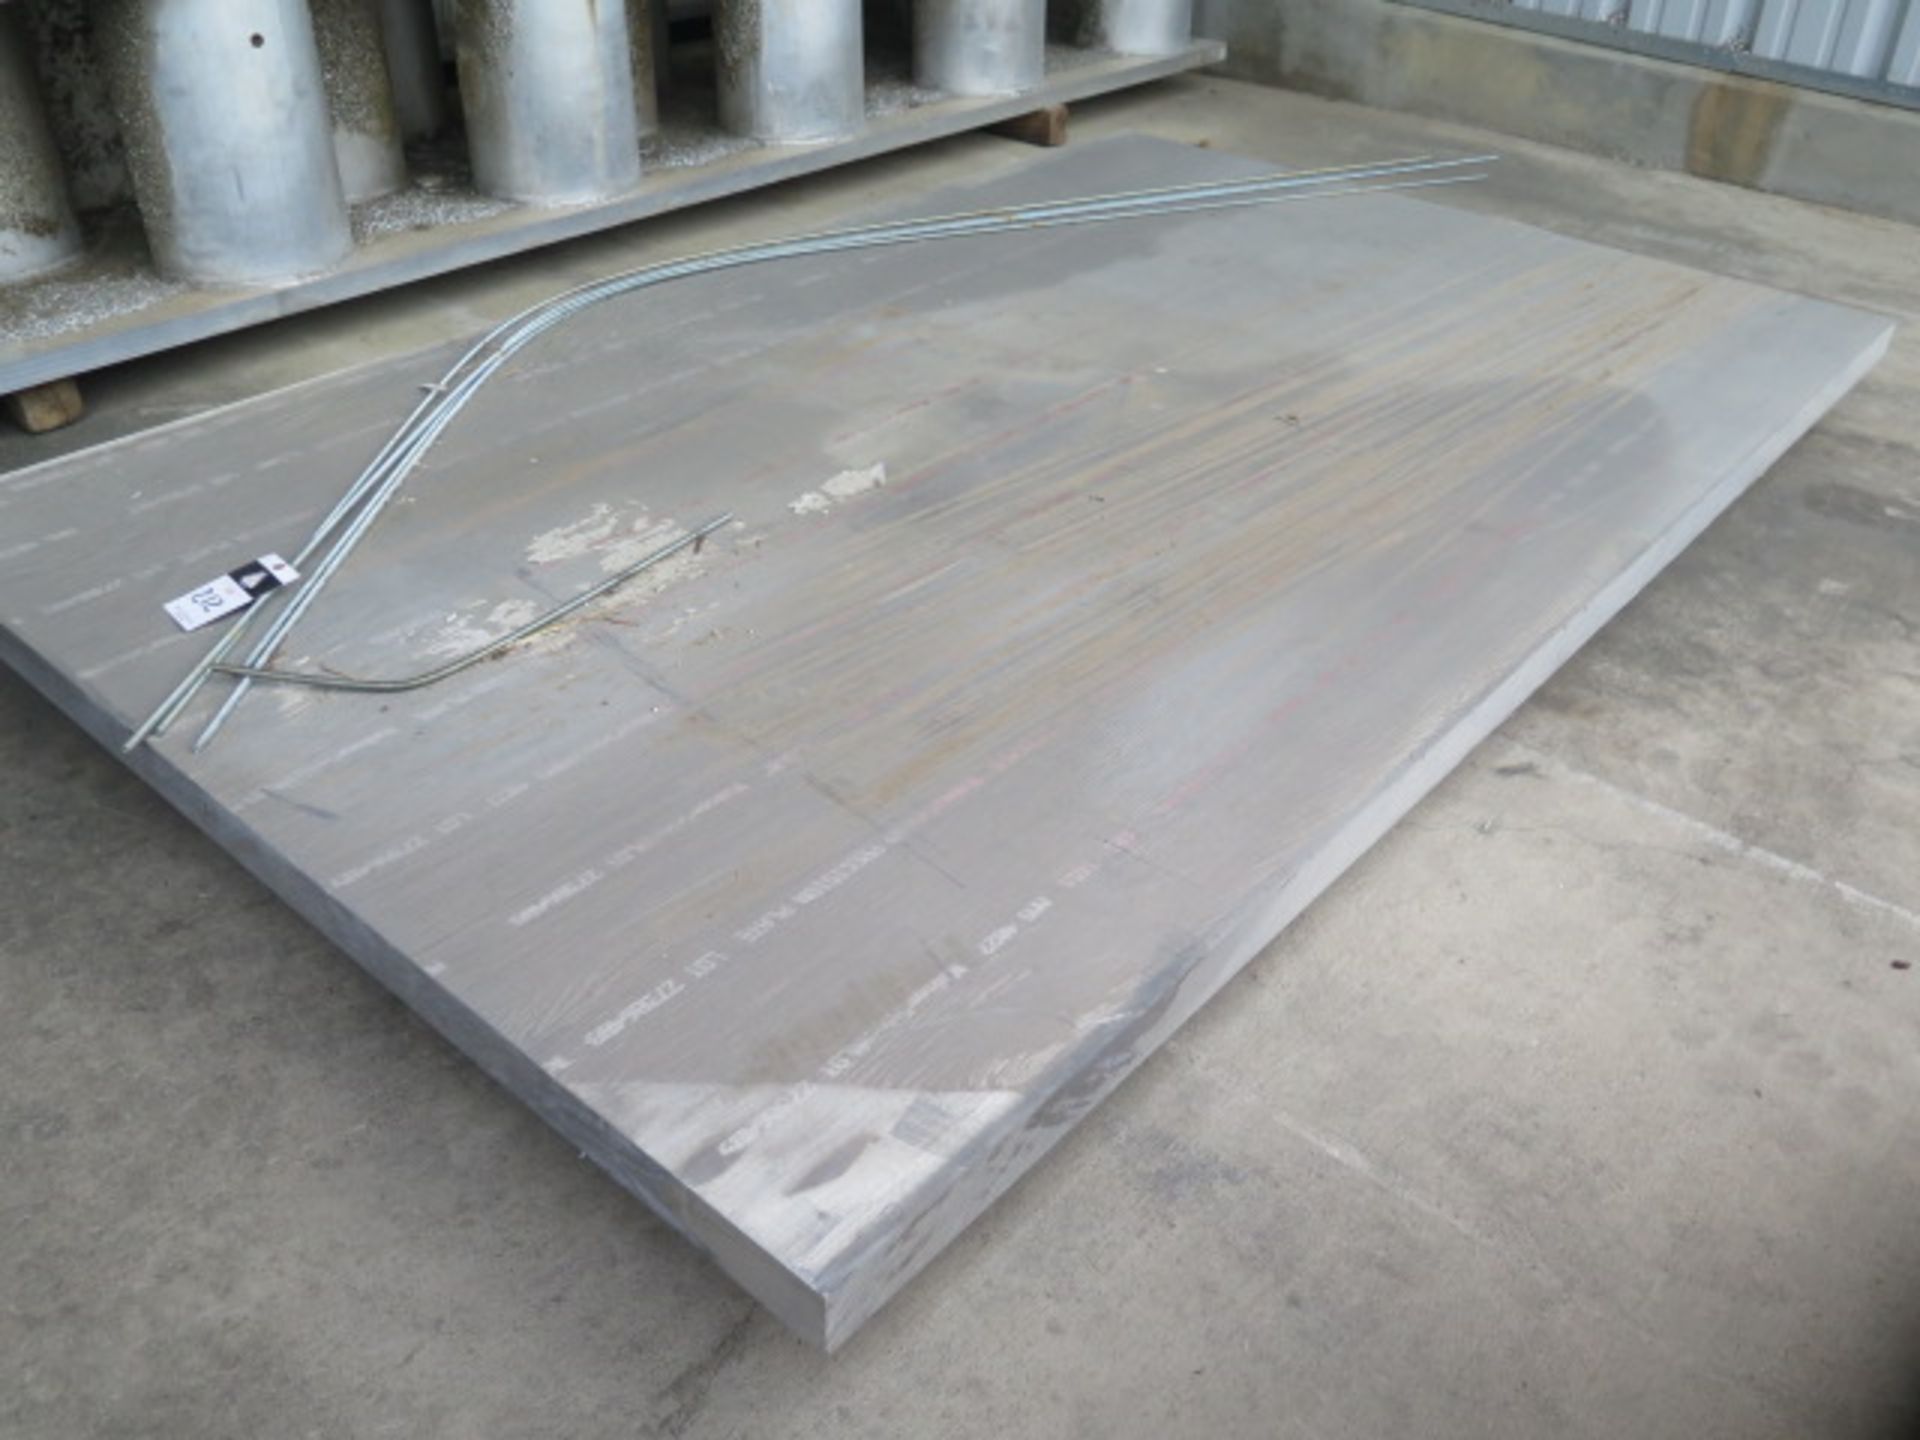 60" x 97" x 2.5" 6061-T651 Aluminum Plate (SOLD AS-IS - NO WARRANTY) - Image 2 of 4